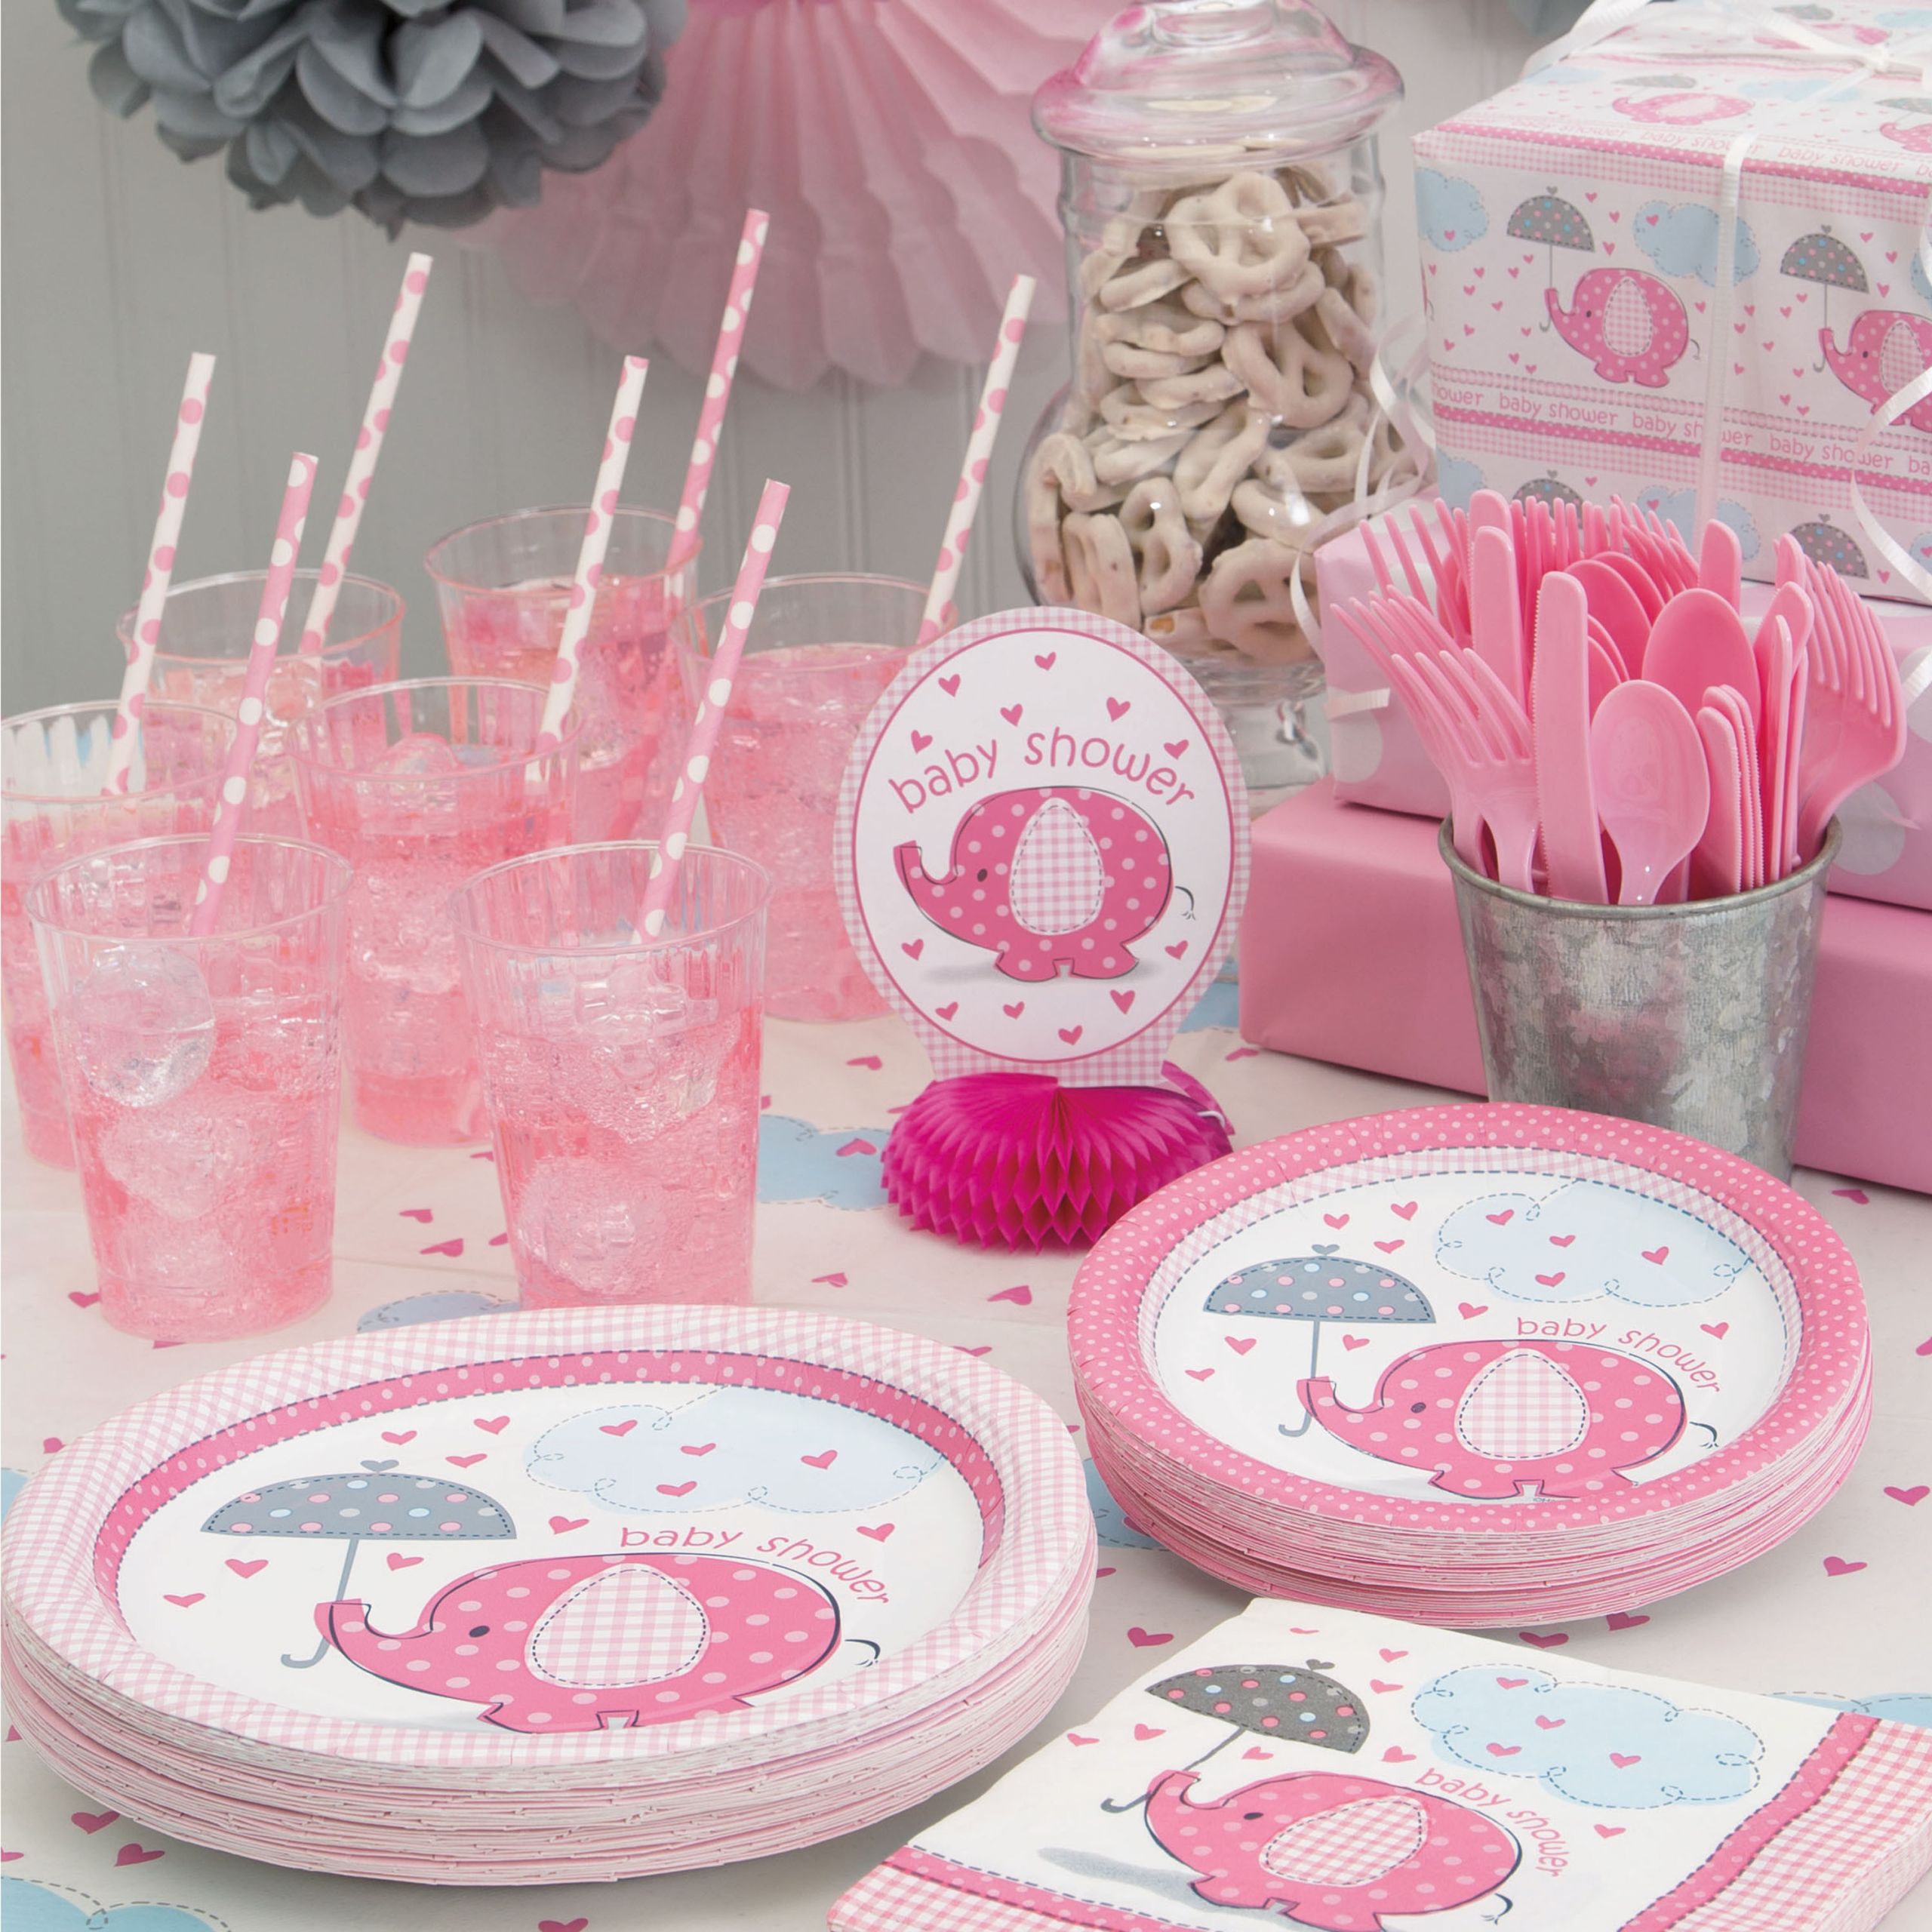 Party City Elephant Baby Shower
 Pink Elephants Baby Shower Supplies Walmart